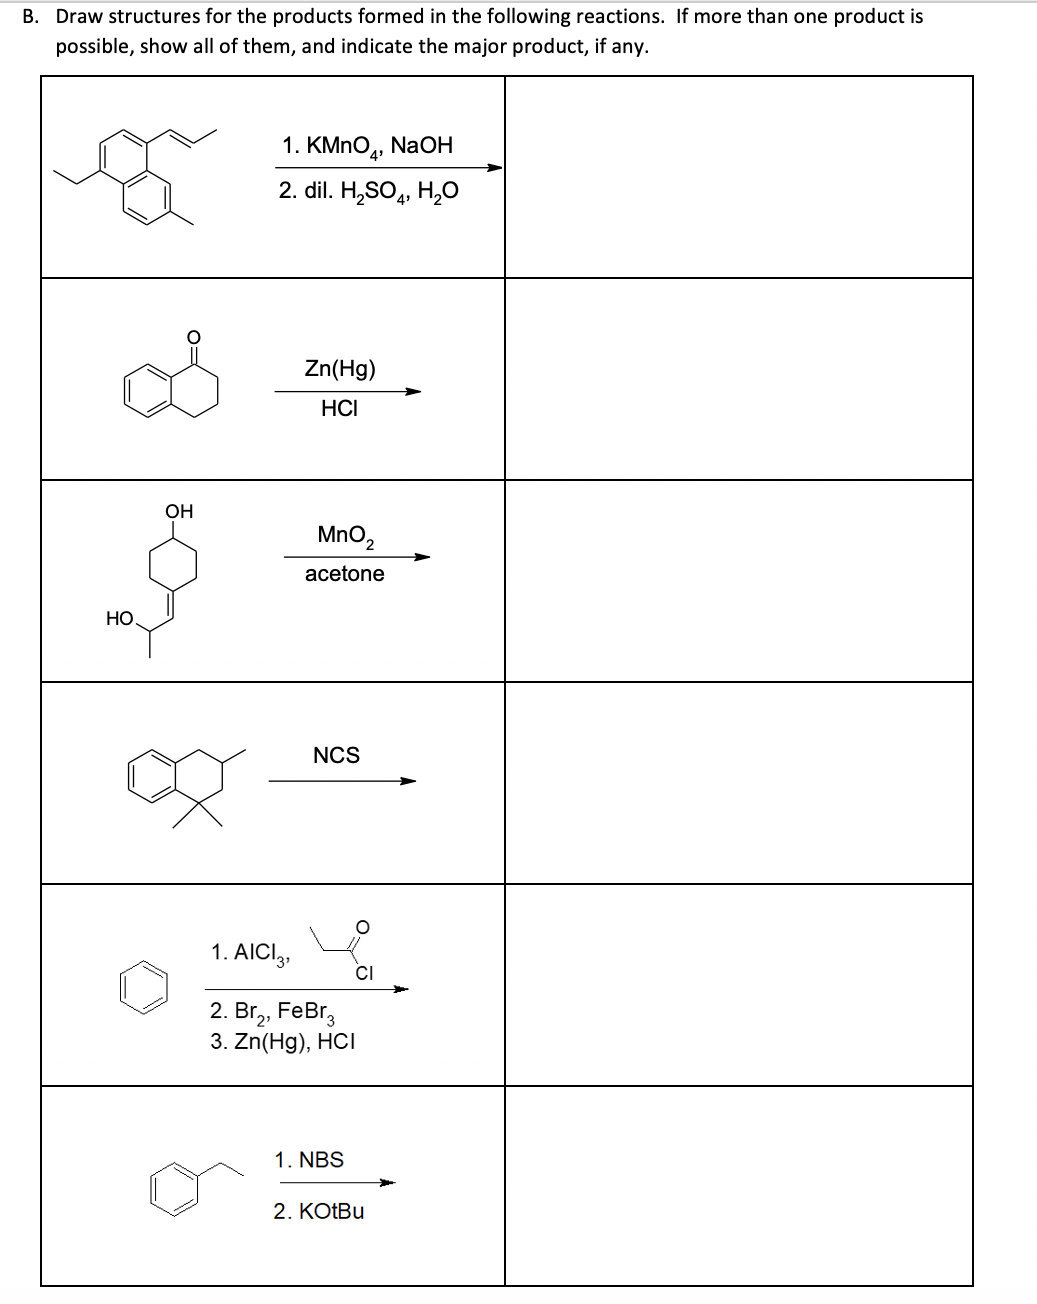 B. Draw structures for the products formed in the following reactions. If more than one product is
possible, show all of them, and indicate the major product, if any.
HO
OH
1. KMnO4, NaOH
2. dil. H₂SO4, H₂O
Zn(Hg)
HCI
MnO₂
acetone
NCS
O
1. AICI3¹
2. Br₂, FeBr3
3. Zn(Hg), HCI
1. NBS
CI
2. KOtBu